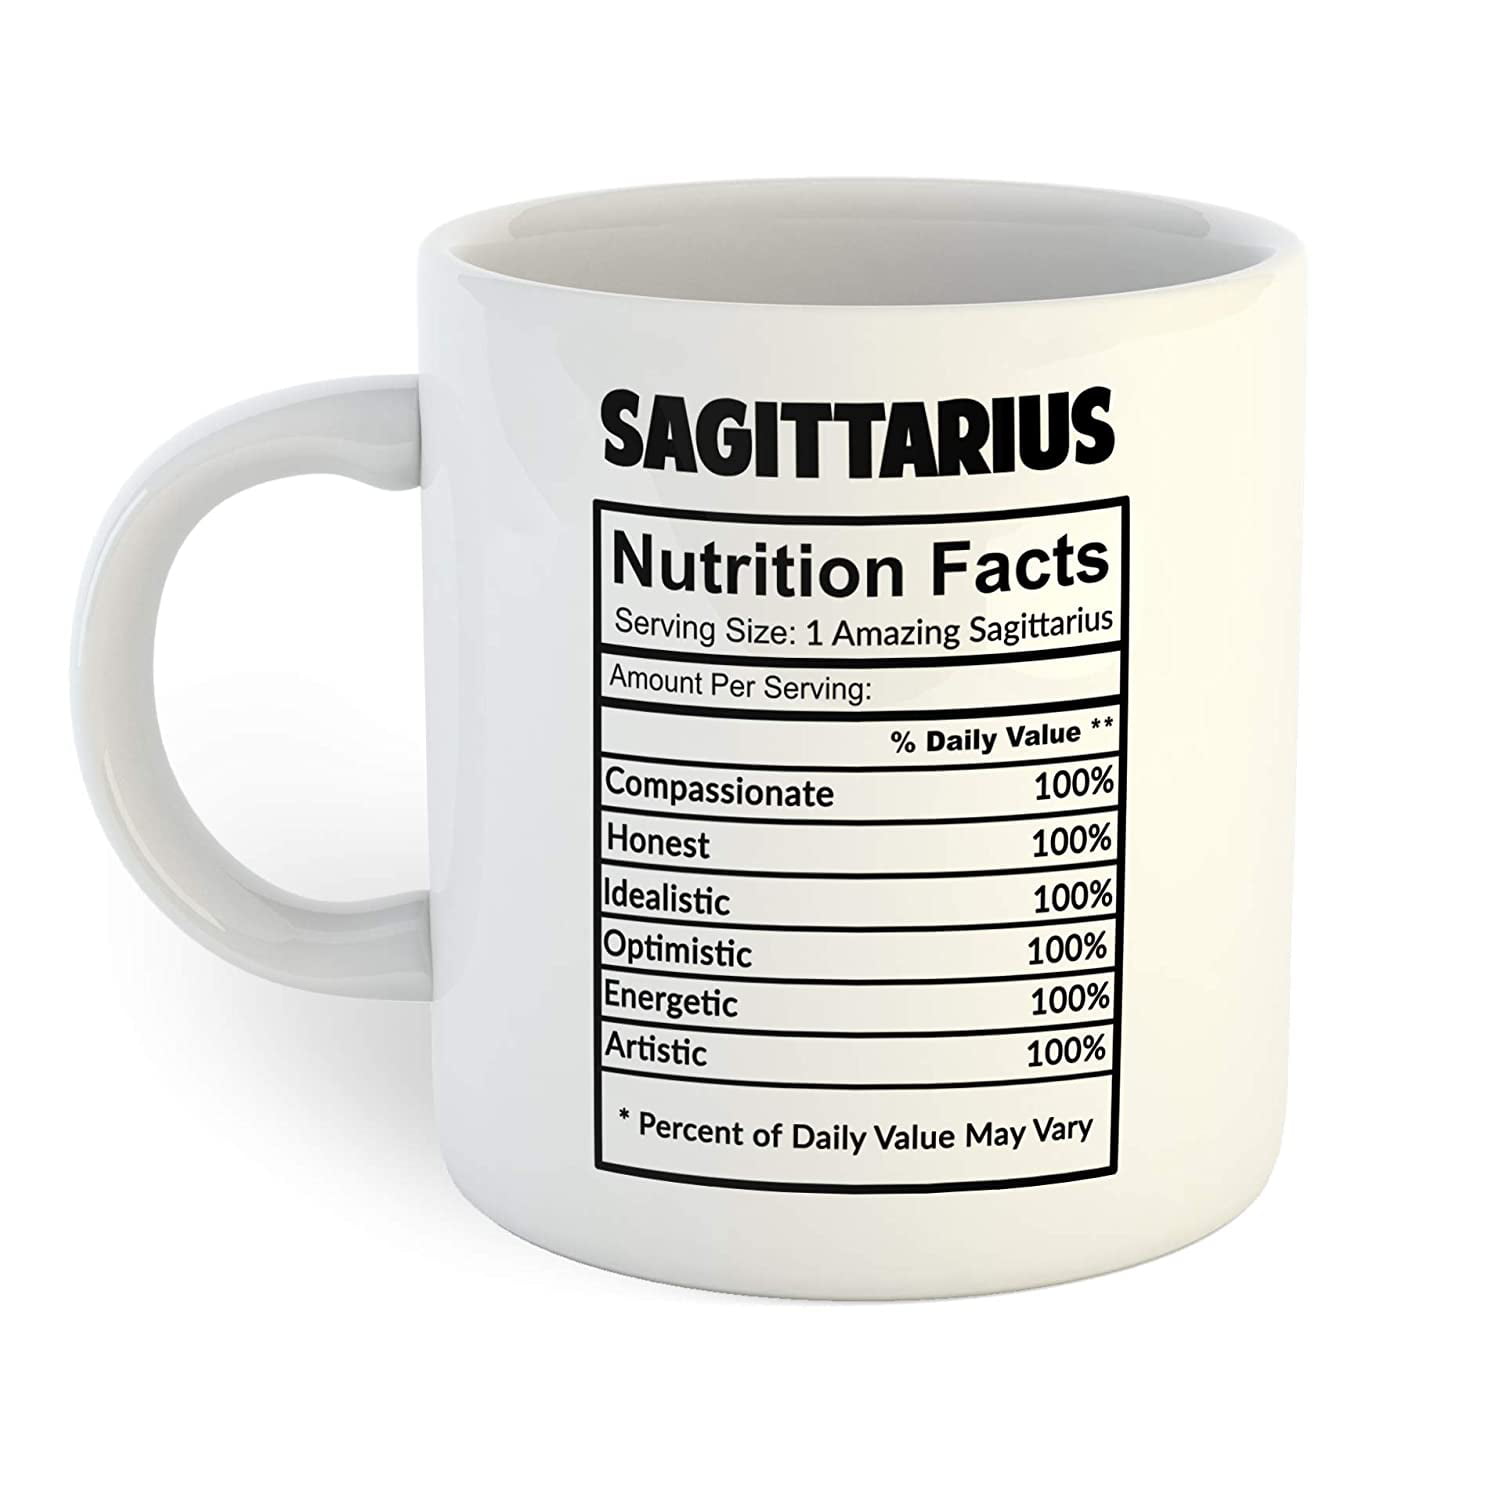 MECHANIC Nutrition Facts EXTRA LARGE COFFEE MUG CUP 15 oz